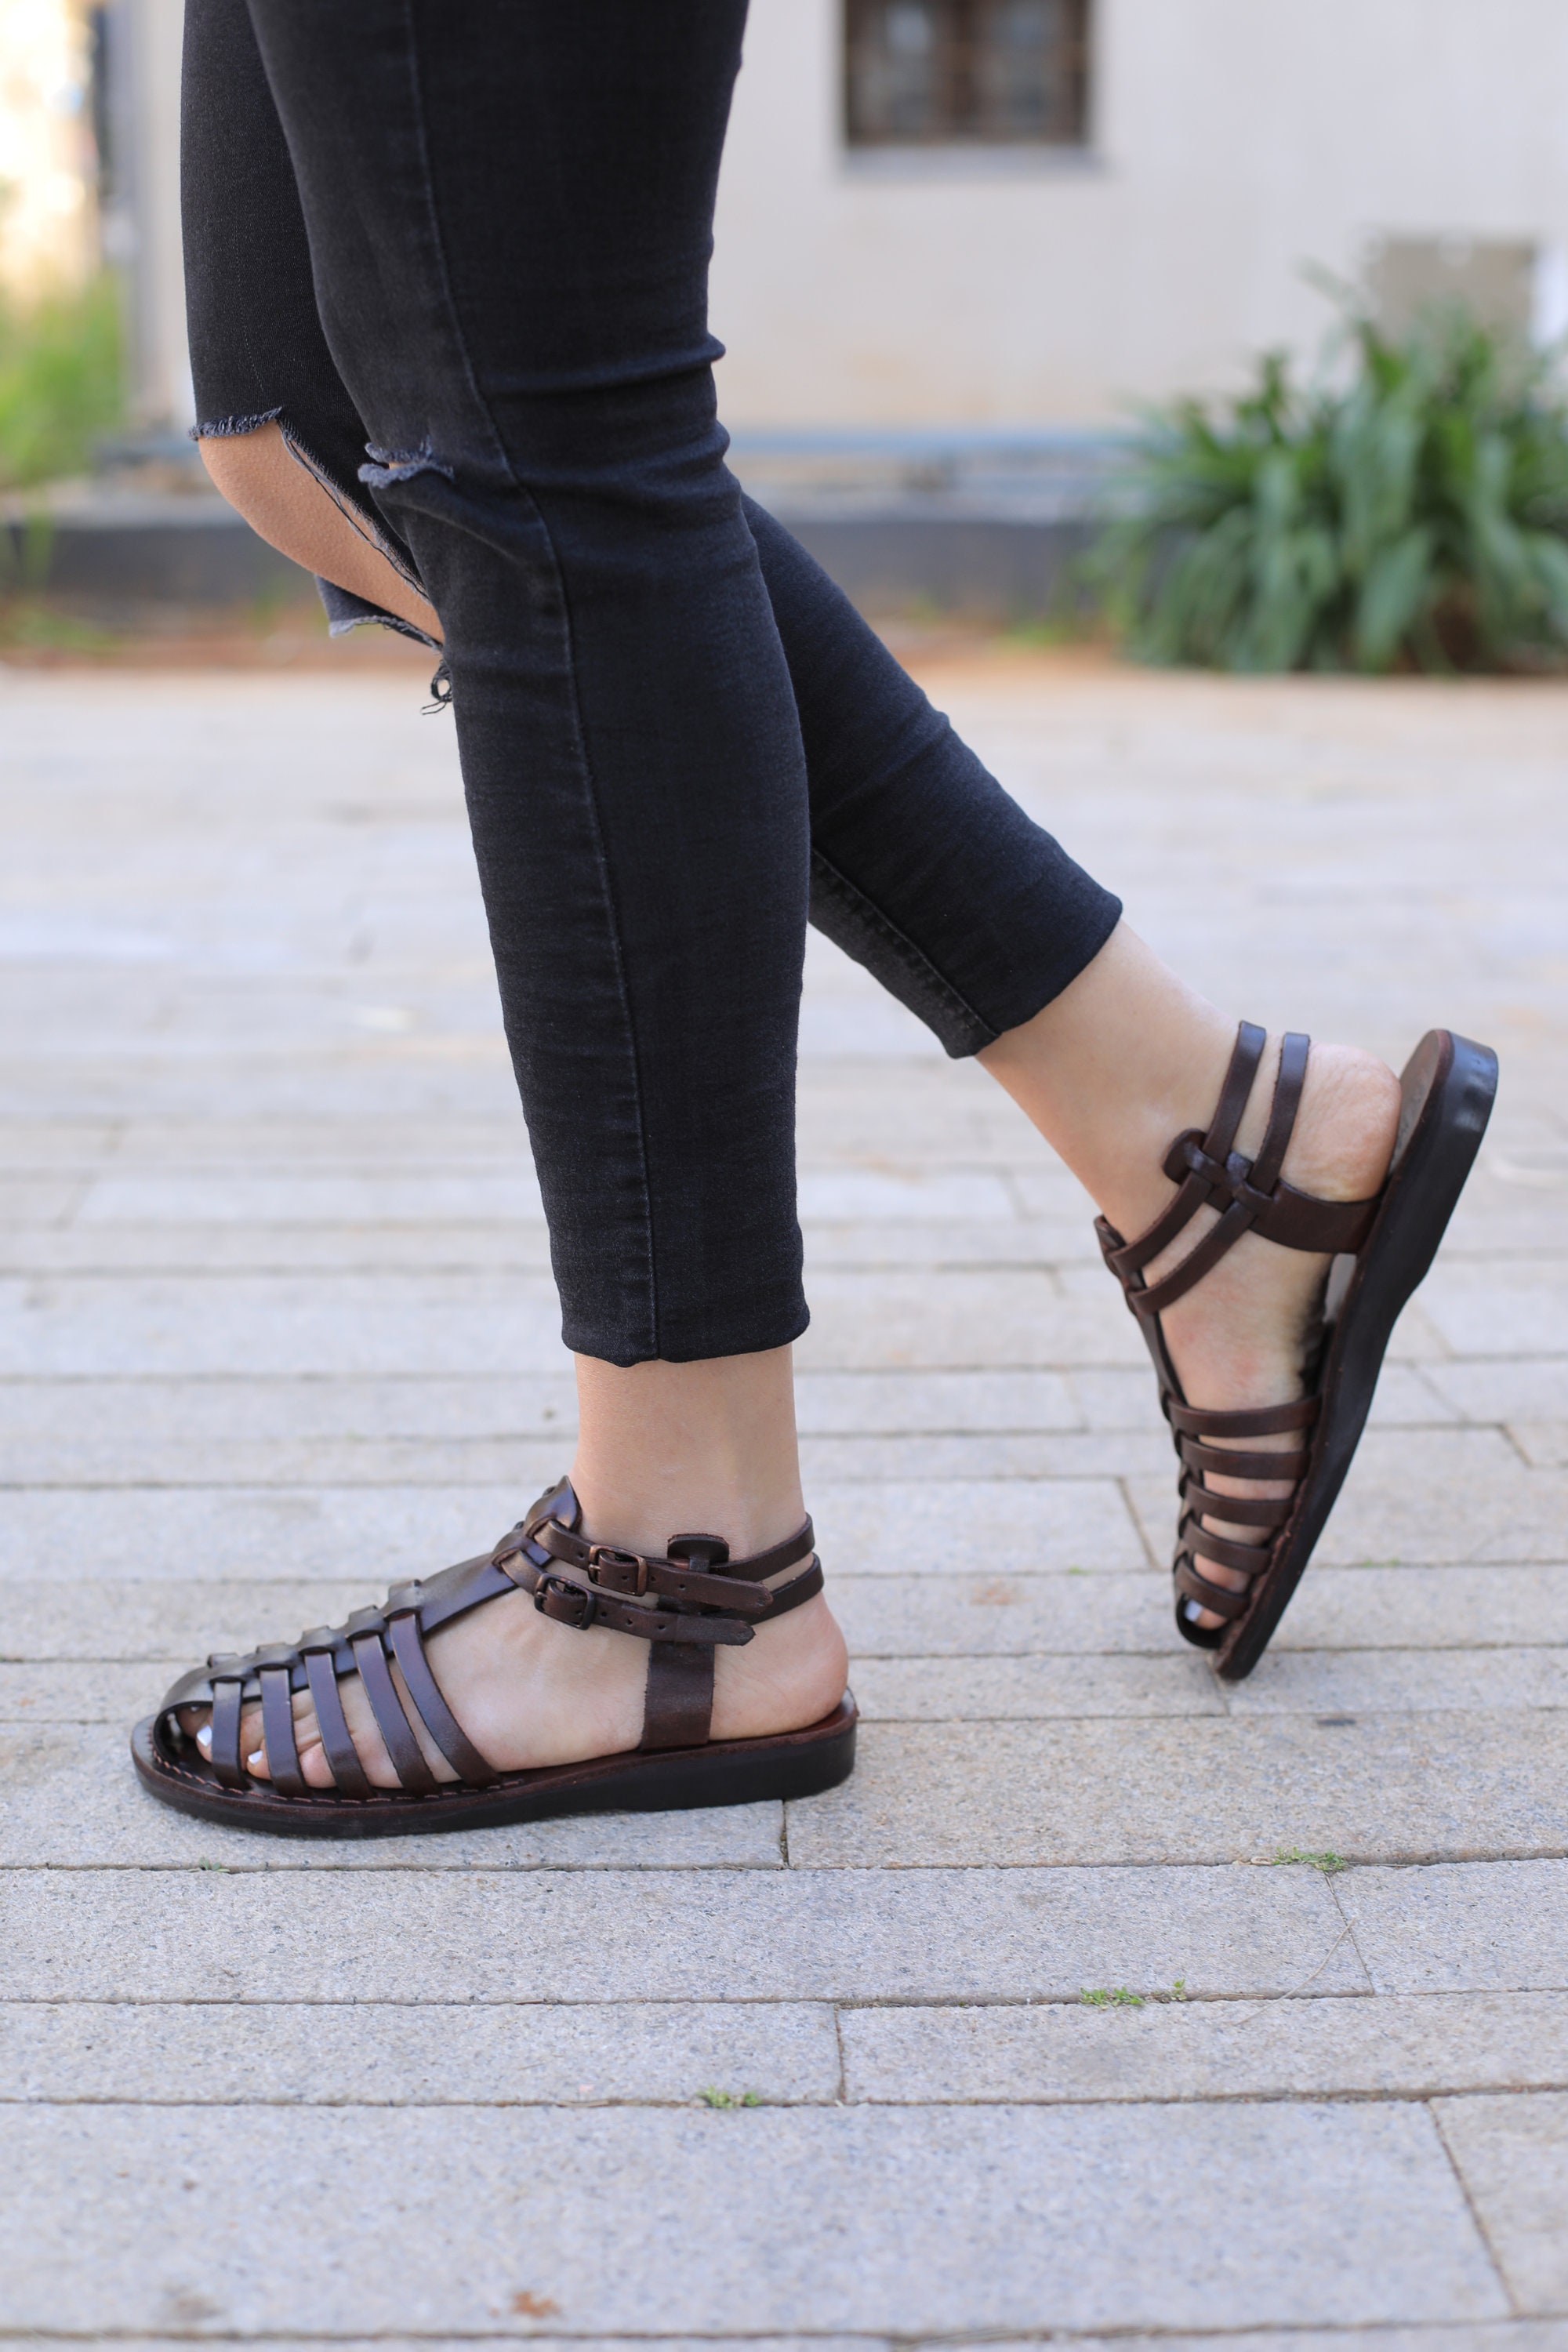  Closed Toe Sandals For Women